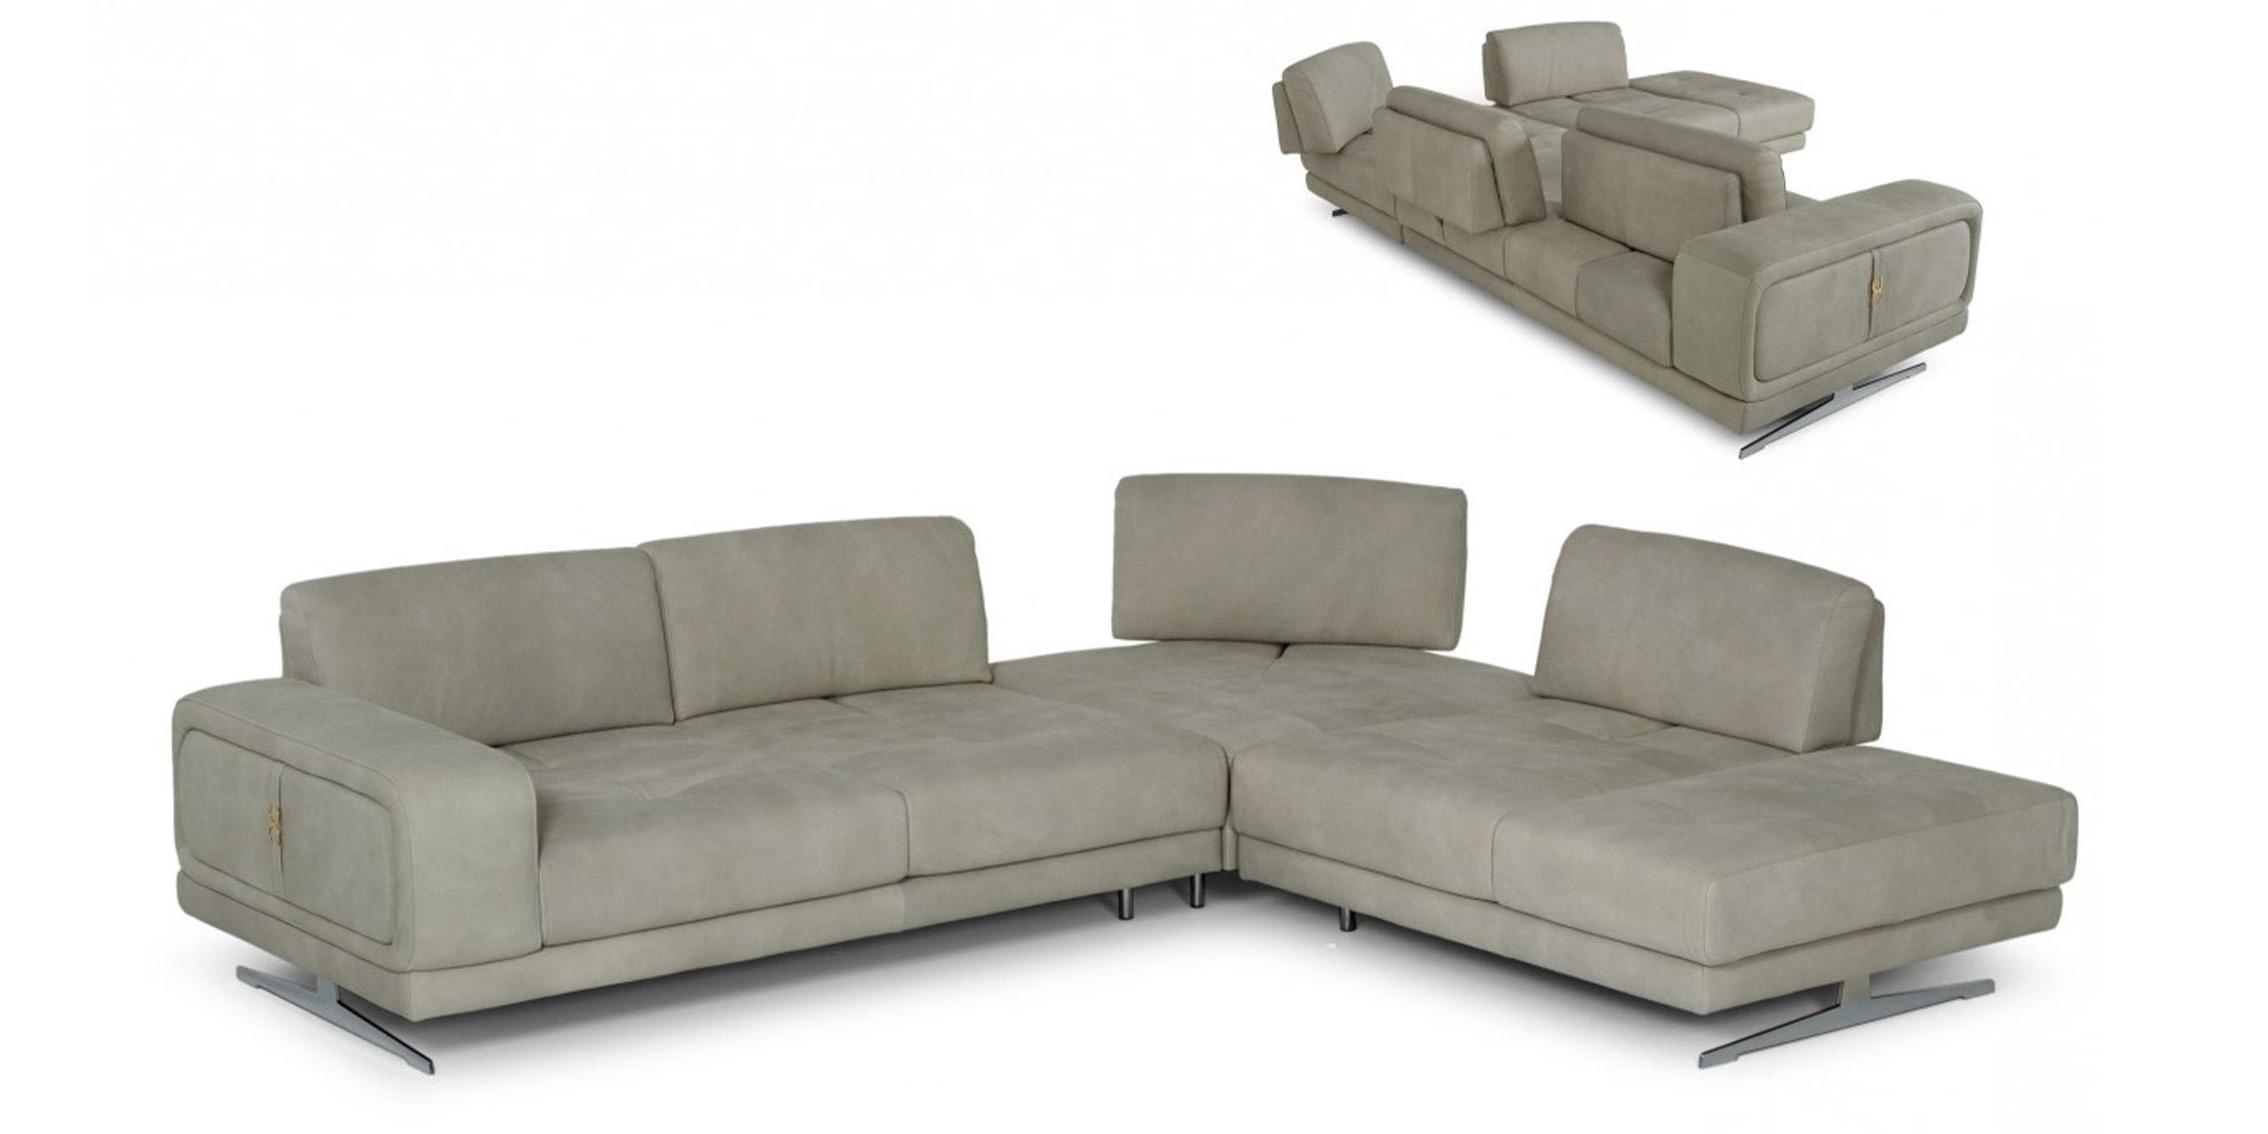 Contemporary, Modern Sectional Sofa VGCCMOOD-GRY-CLOUD-RAF-SECT 78469 VGCCMOOD-GRY-CLOUD-RAF-SECT in Gray Italian Leather